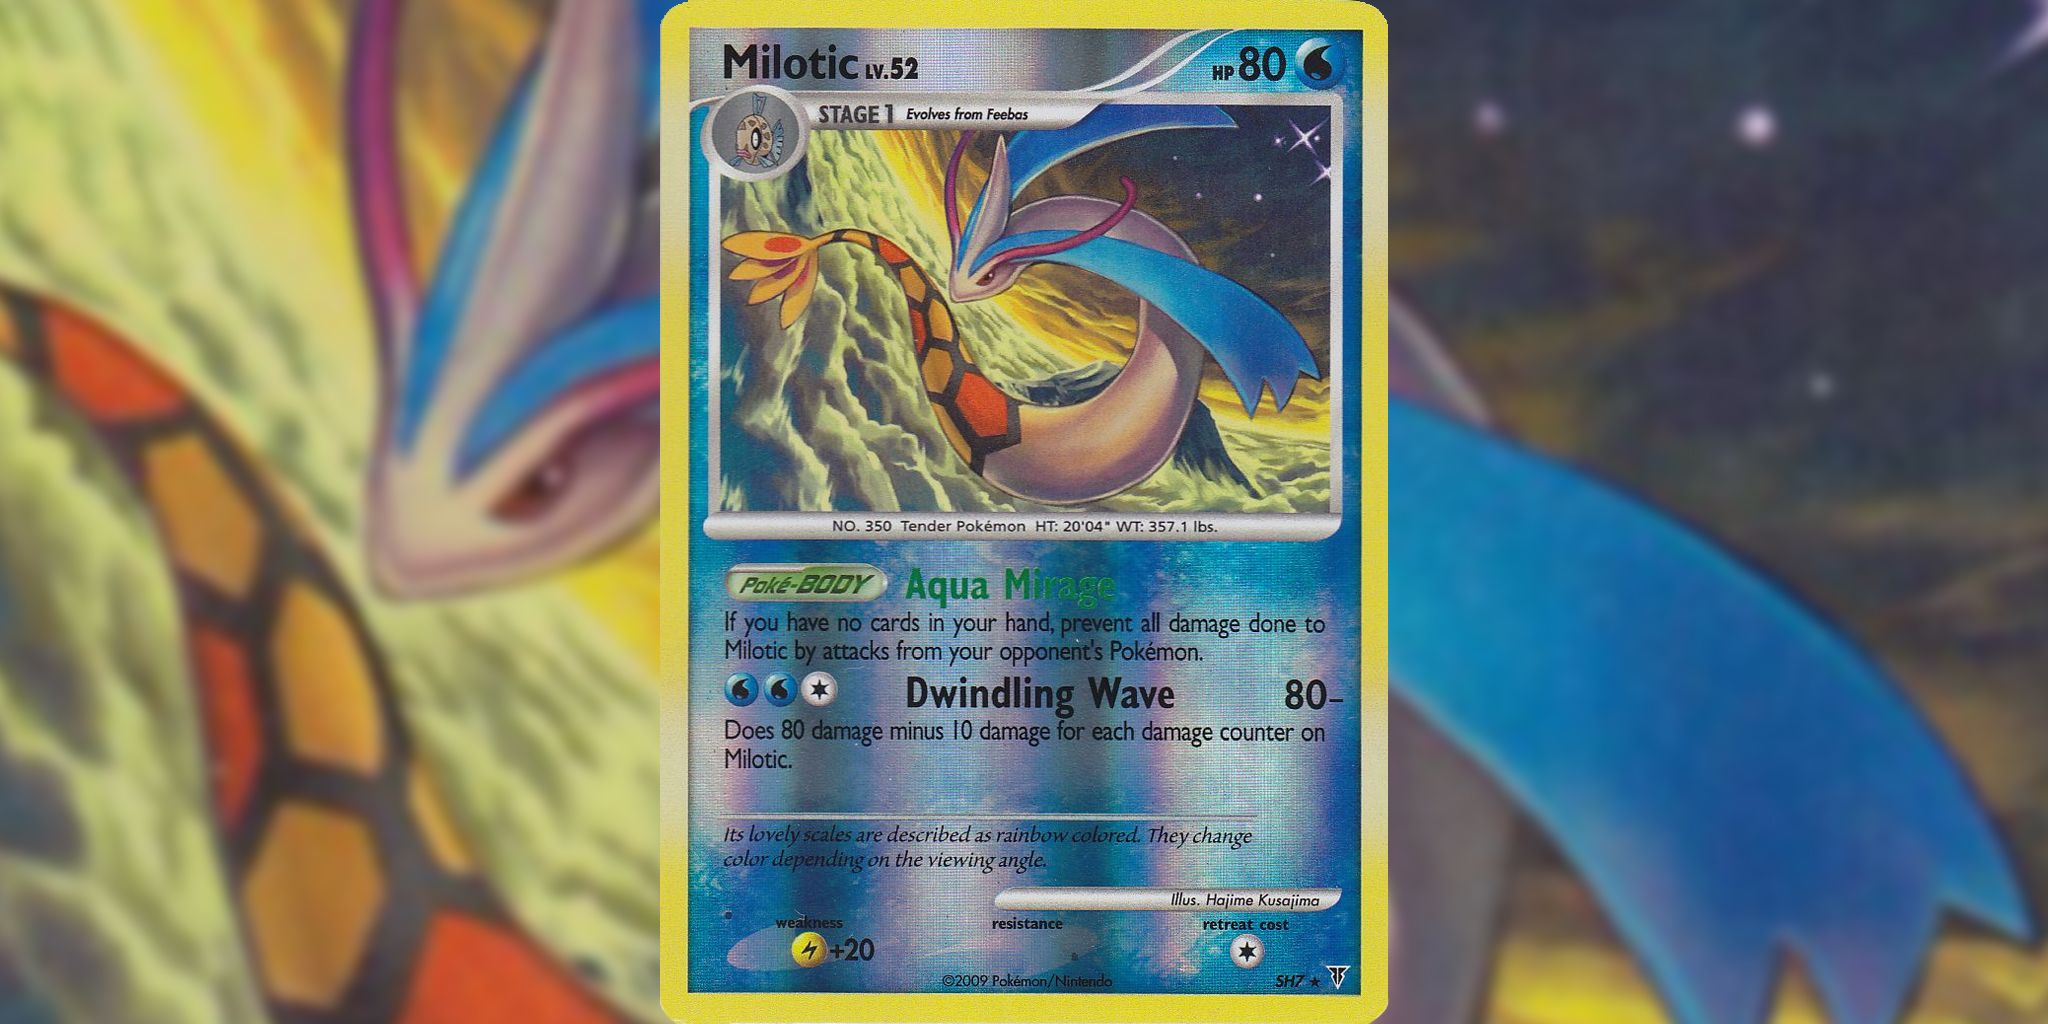 5 of the most expensive Pokemon cards ever sold